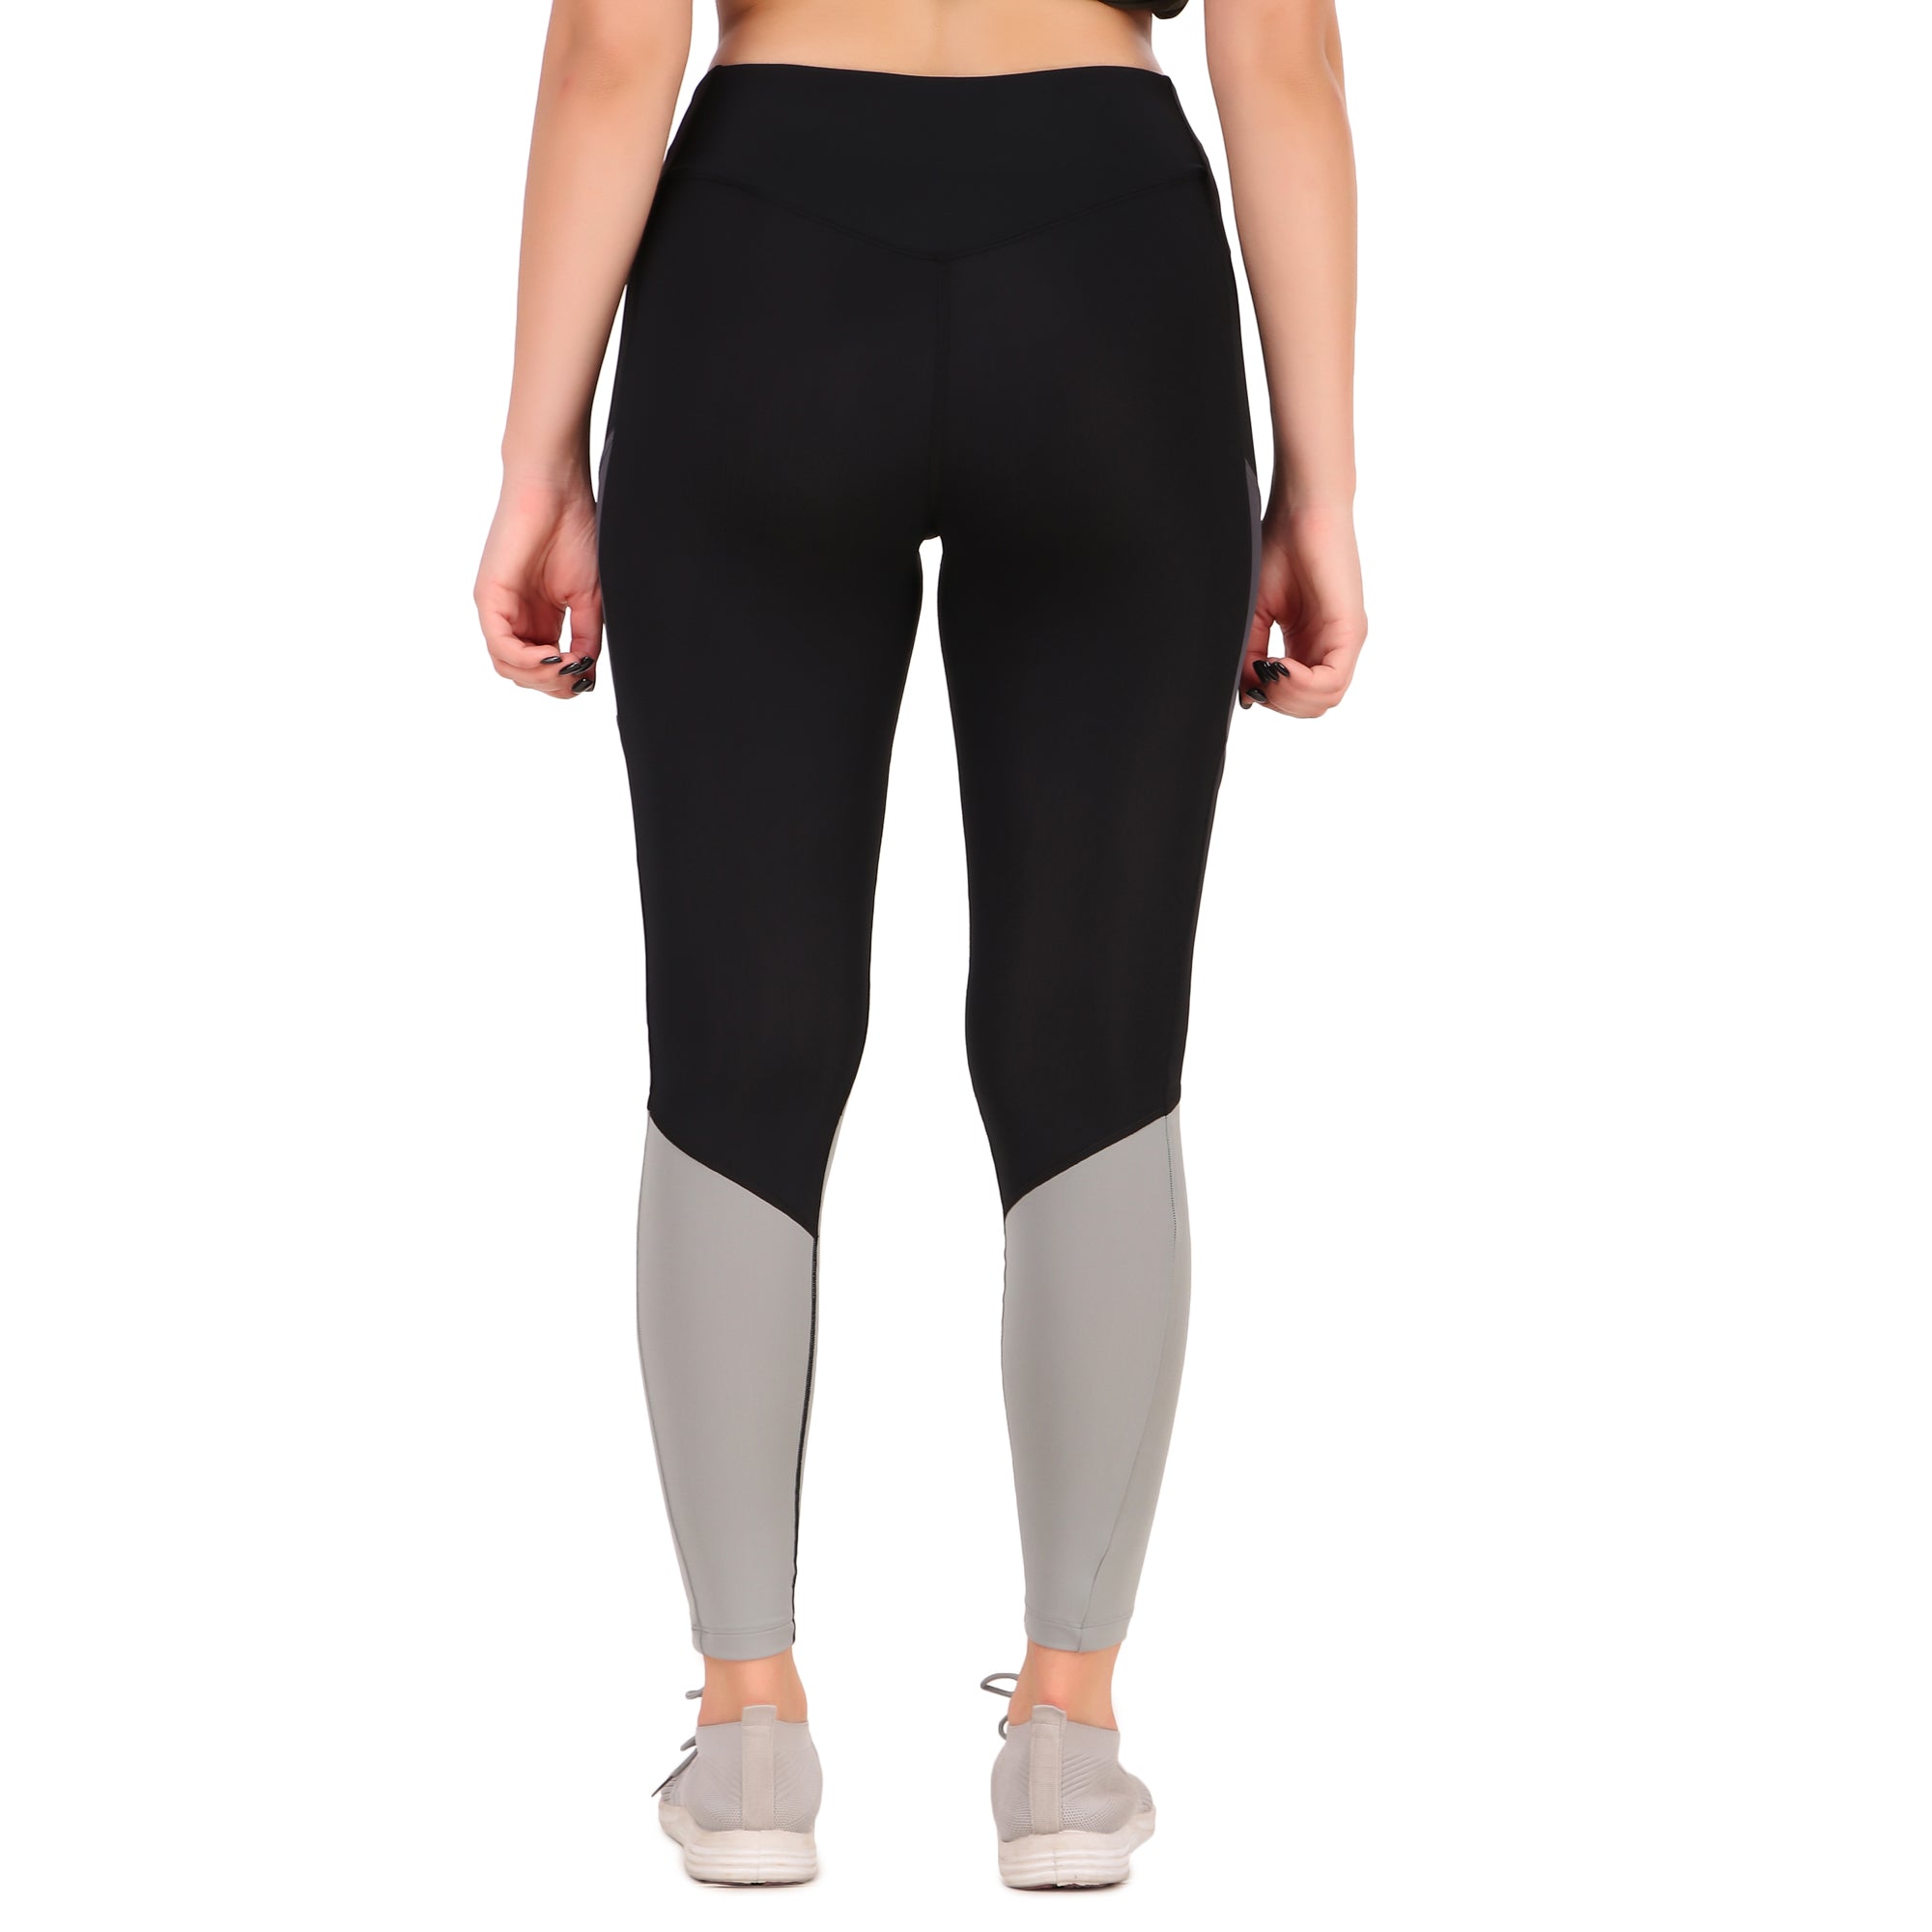 Nylon Compression Legging/Tights For Women (BK/DGRY/LGRY)